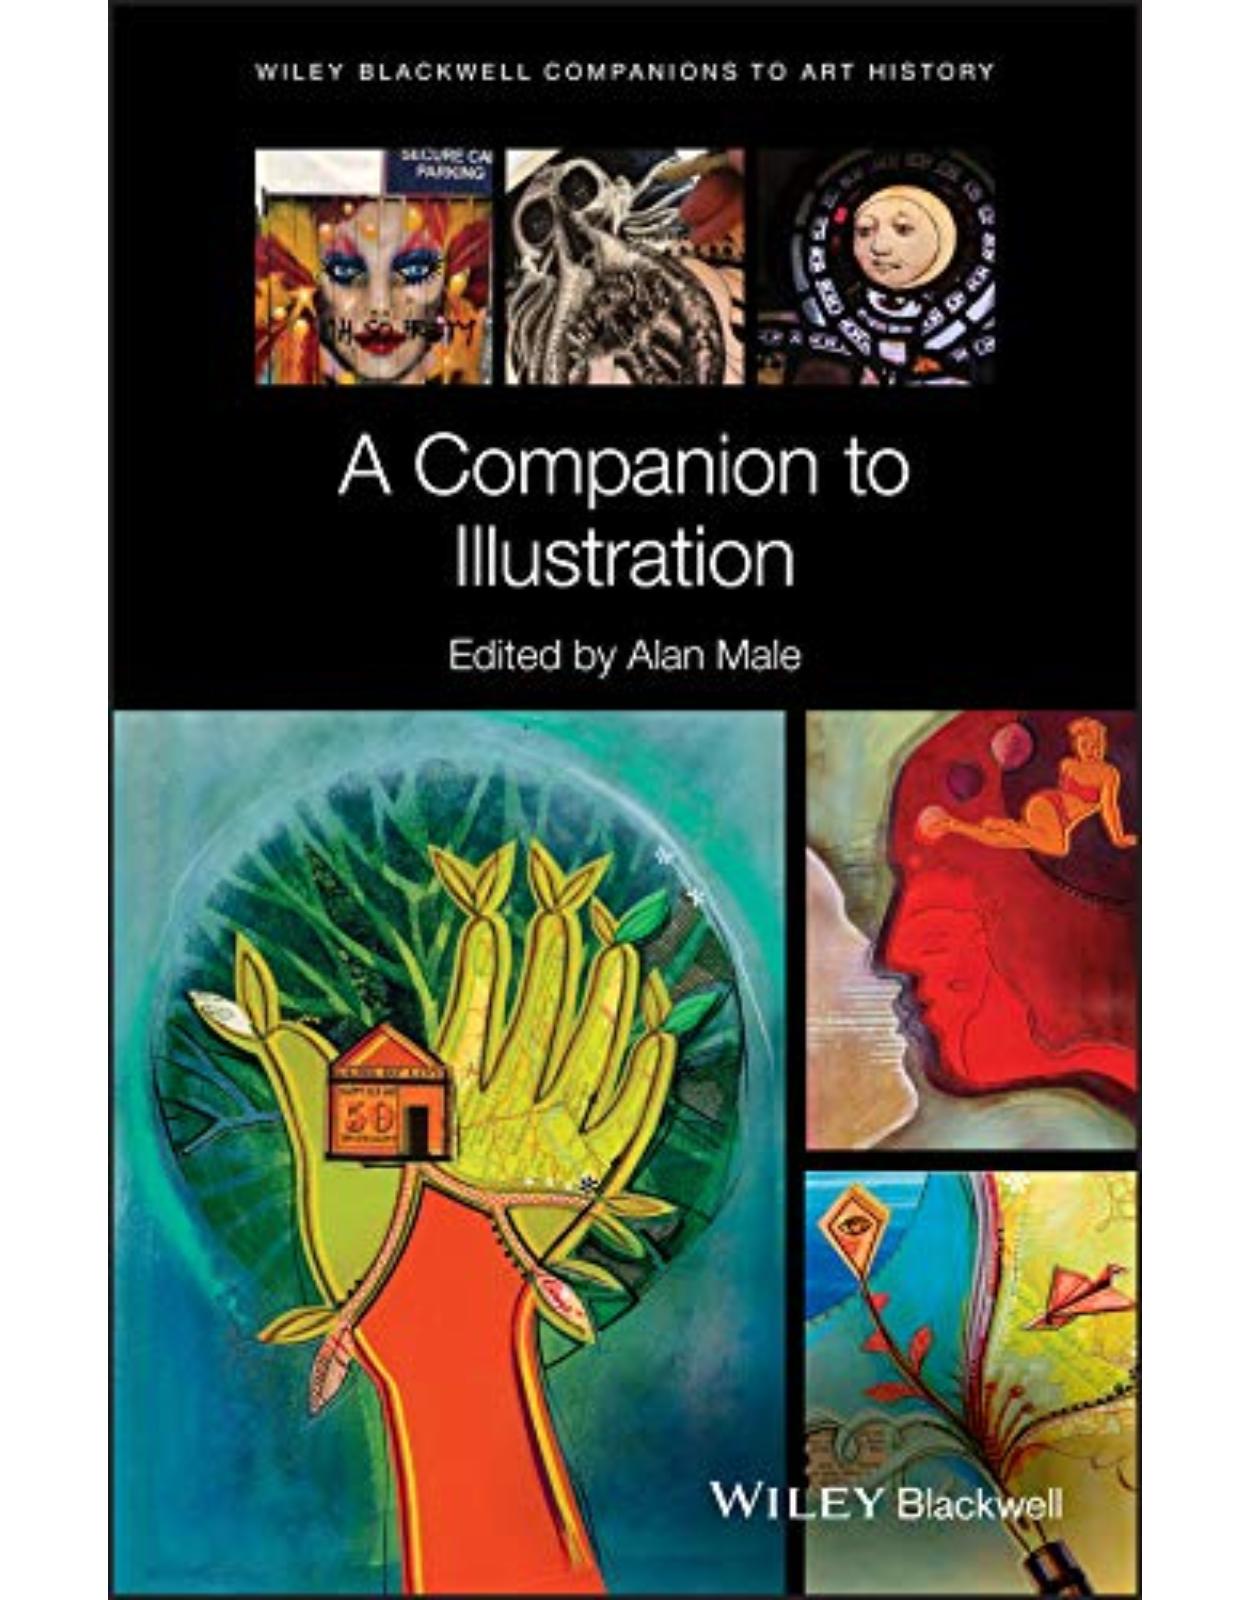 A Companion to Illustration: Art and Theory 